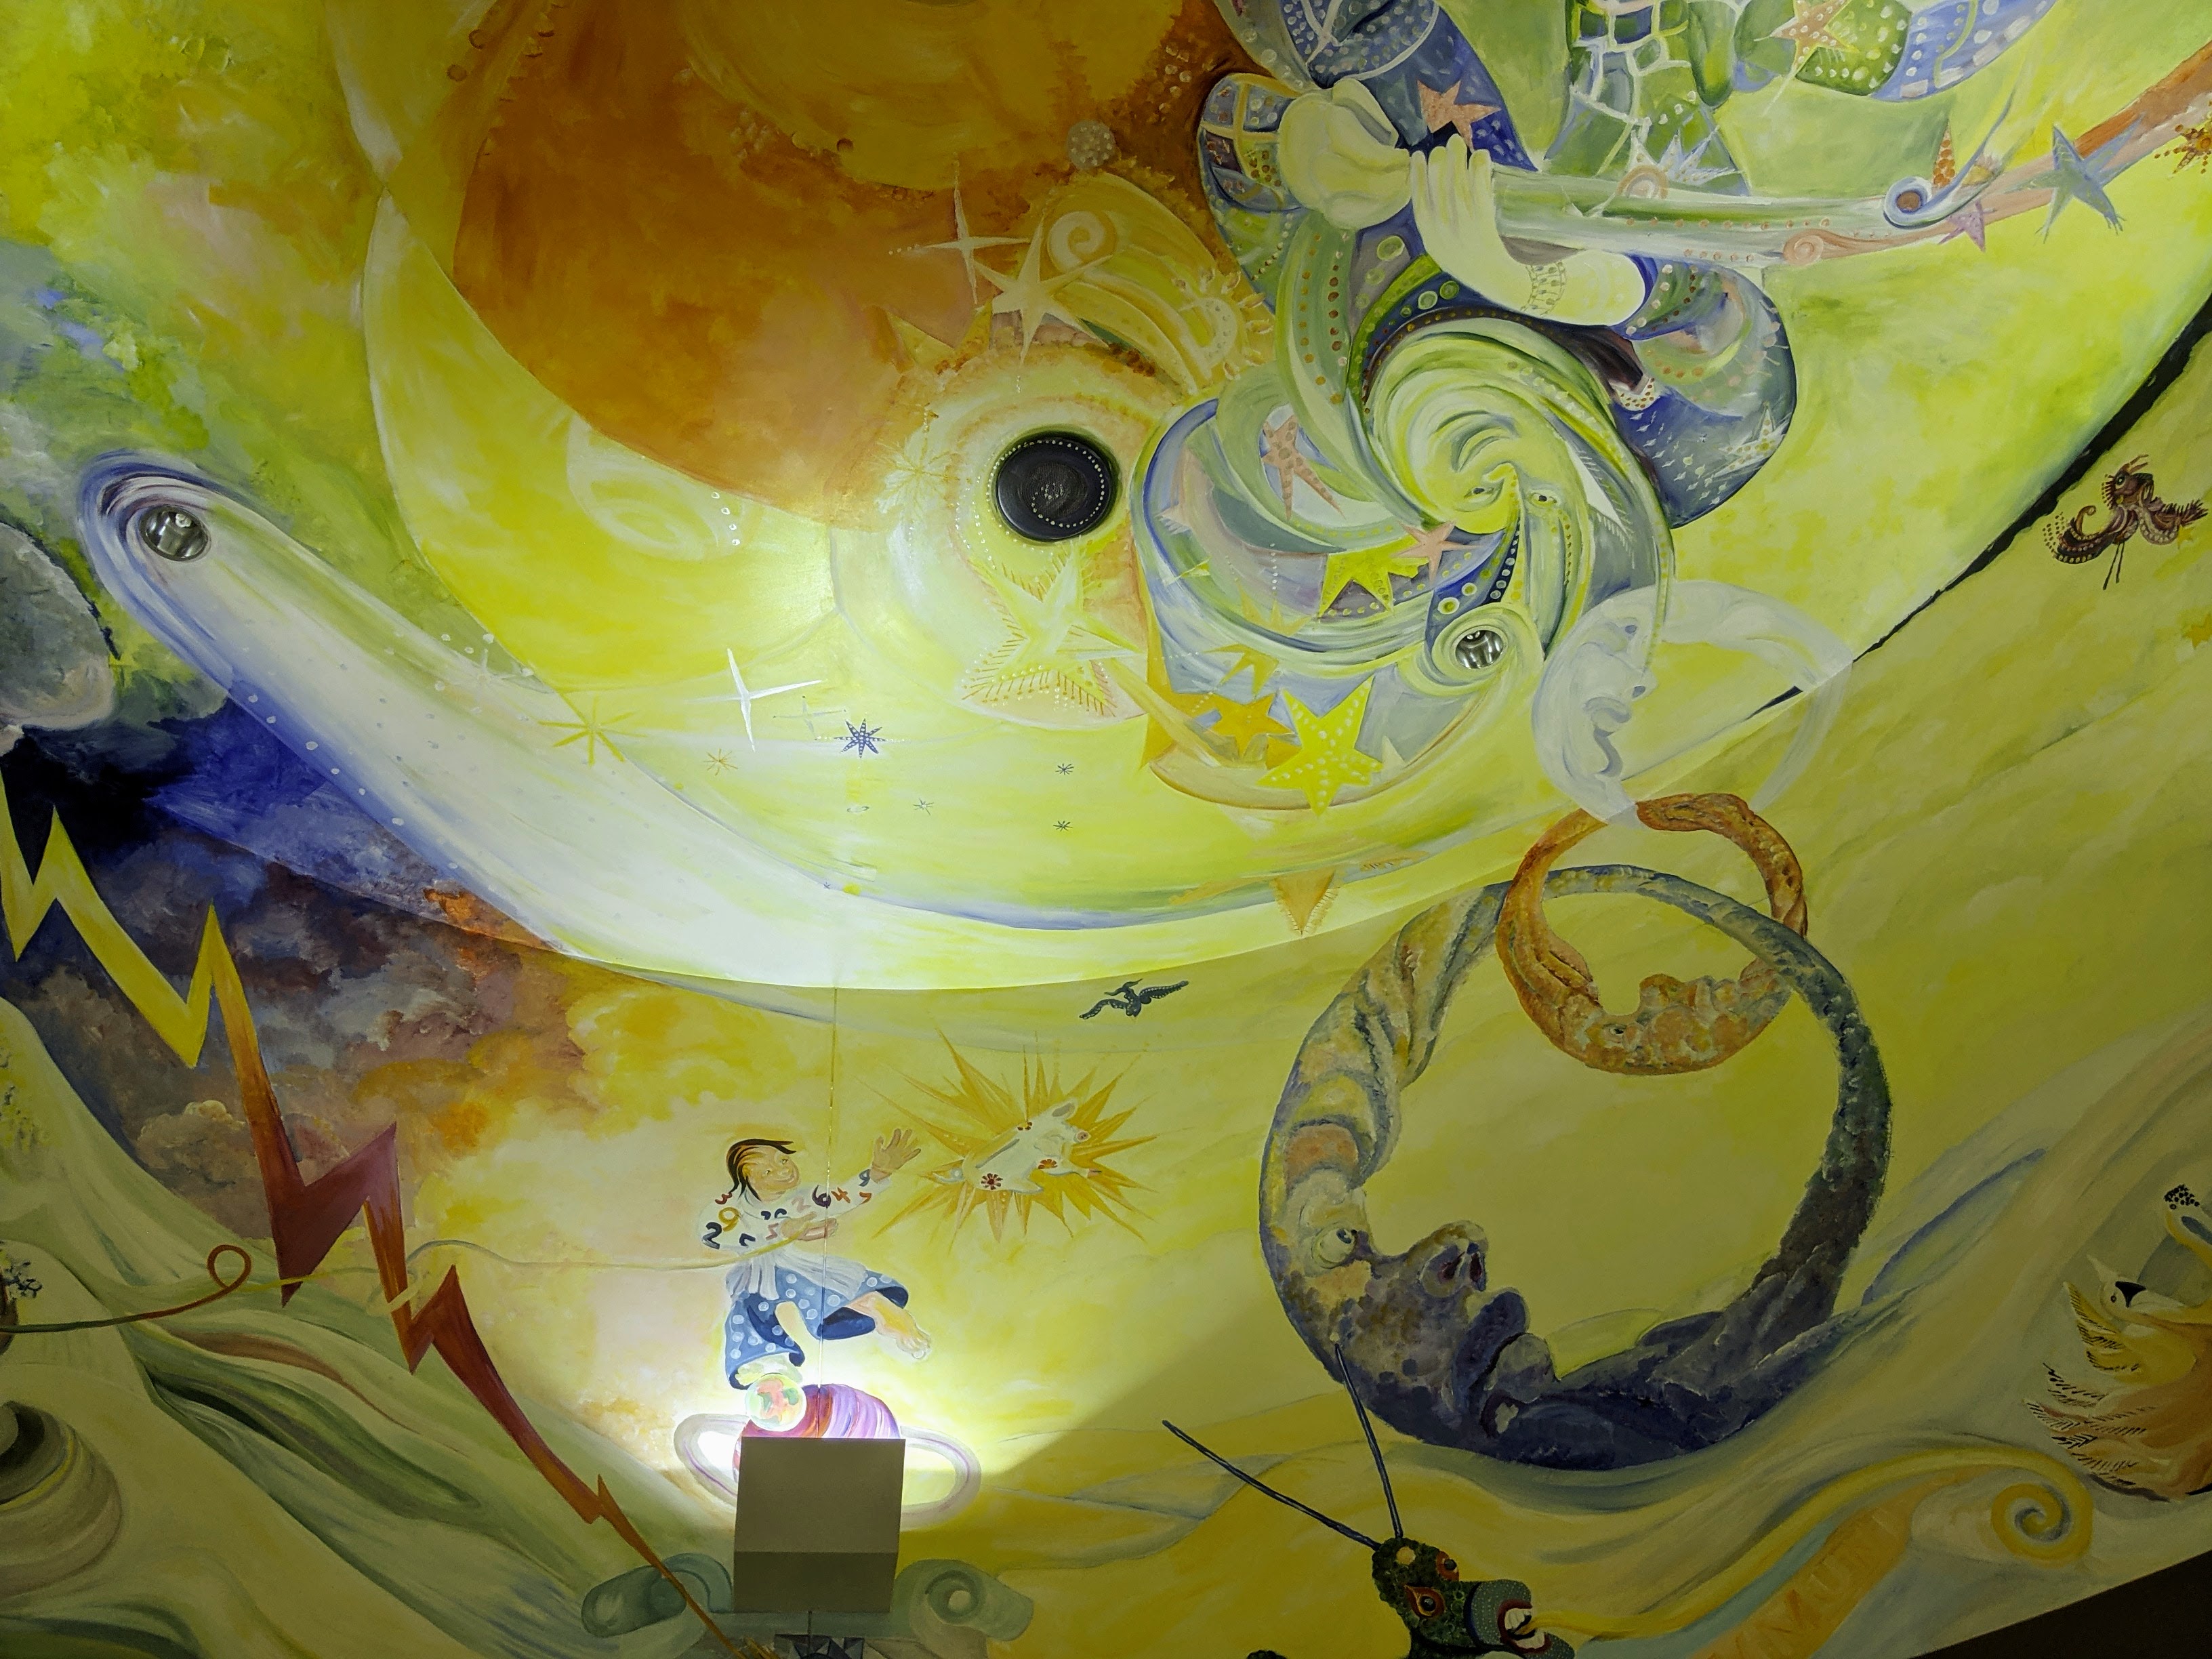 Closeup of abstract elements from "The Brainstorm" mural